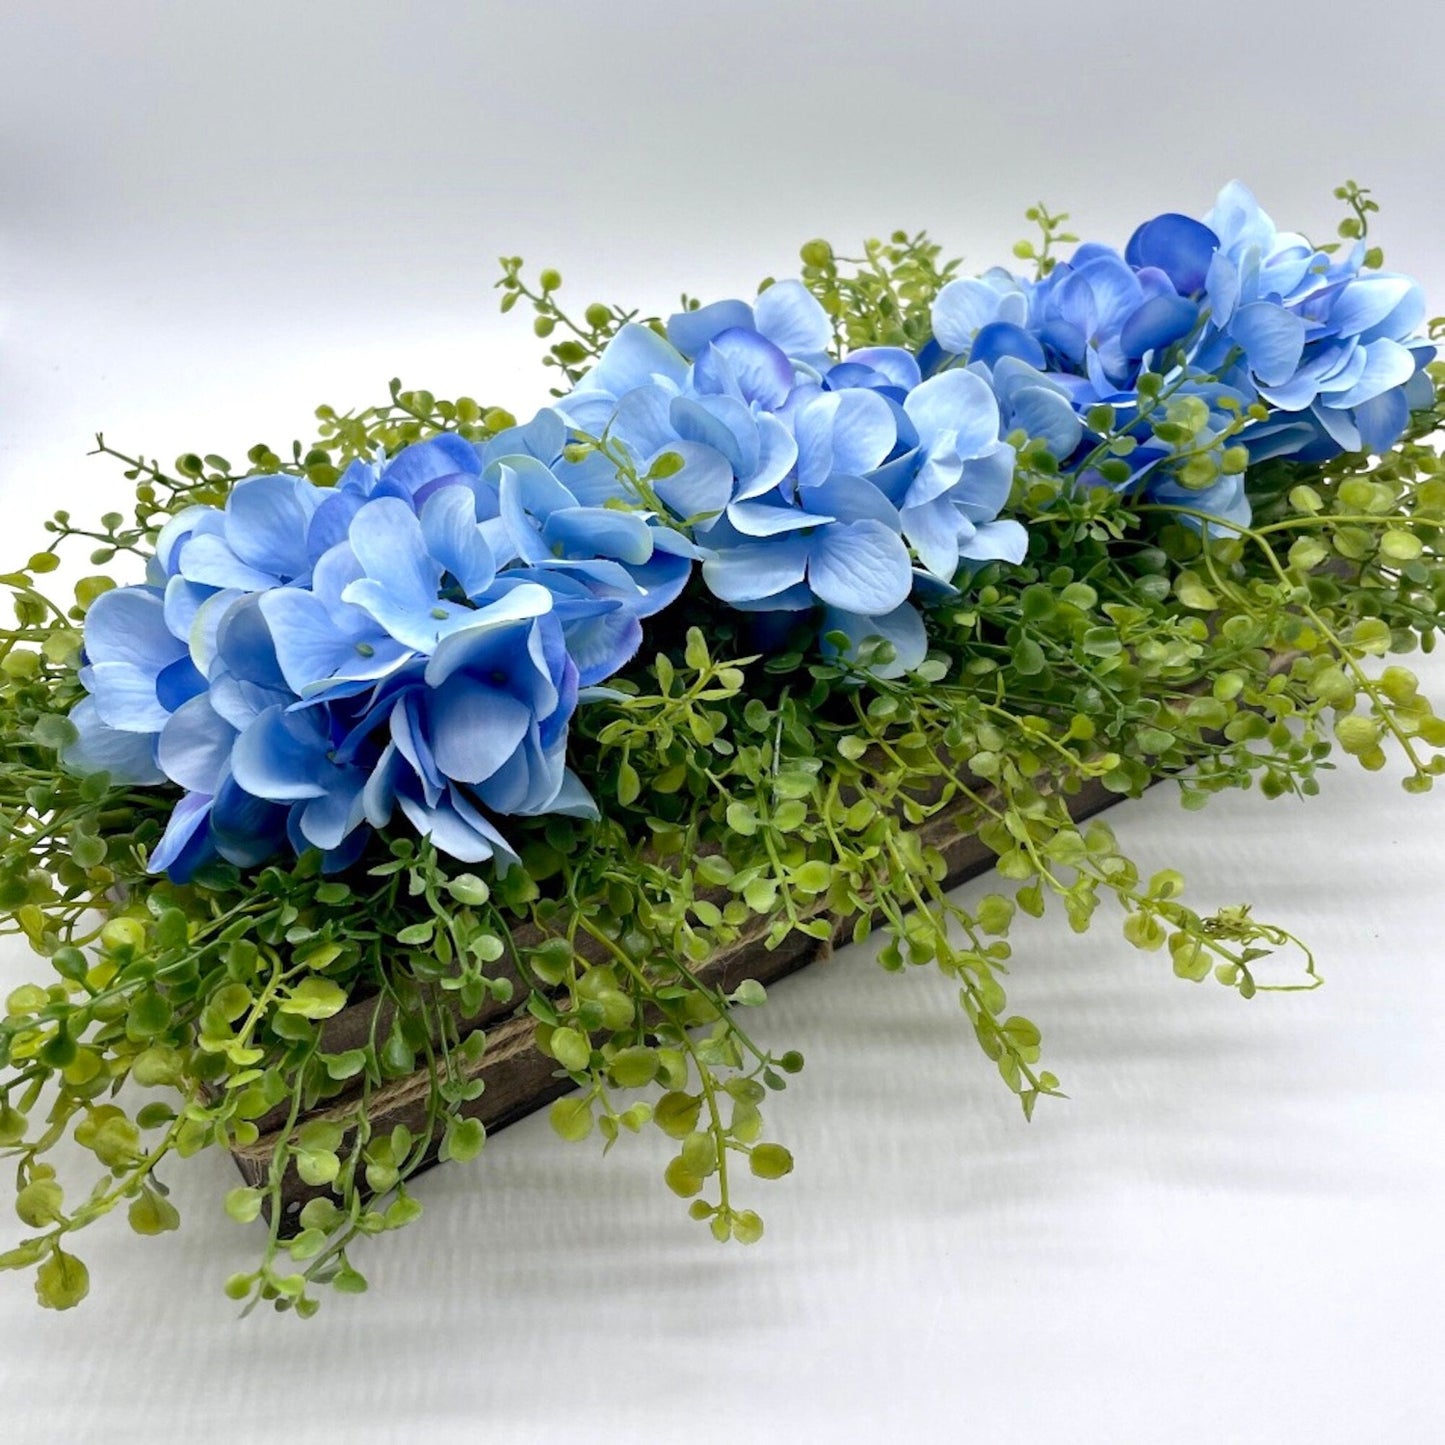 Spring Centerpiece for Dining Table, Easter Arrangement with Blue Hydrangea, Floral Farmhouse Decoration, Fake Flowers in Wooden Planter Box